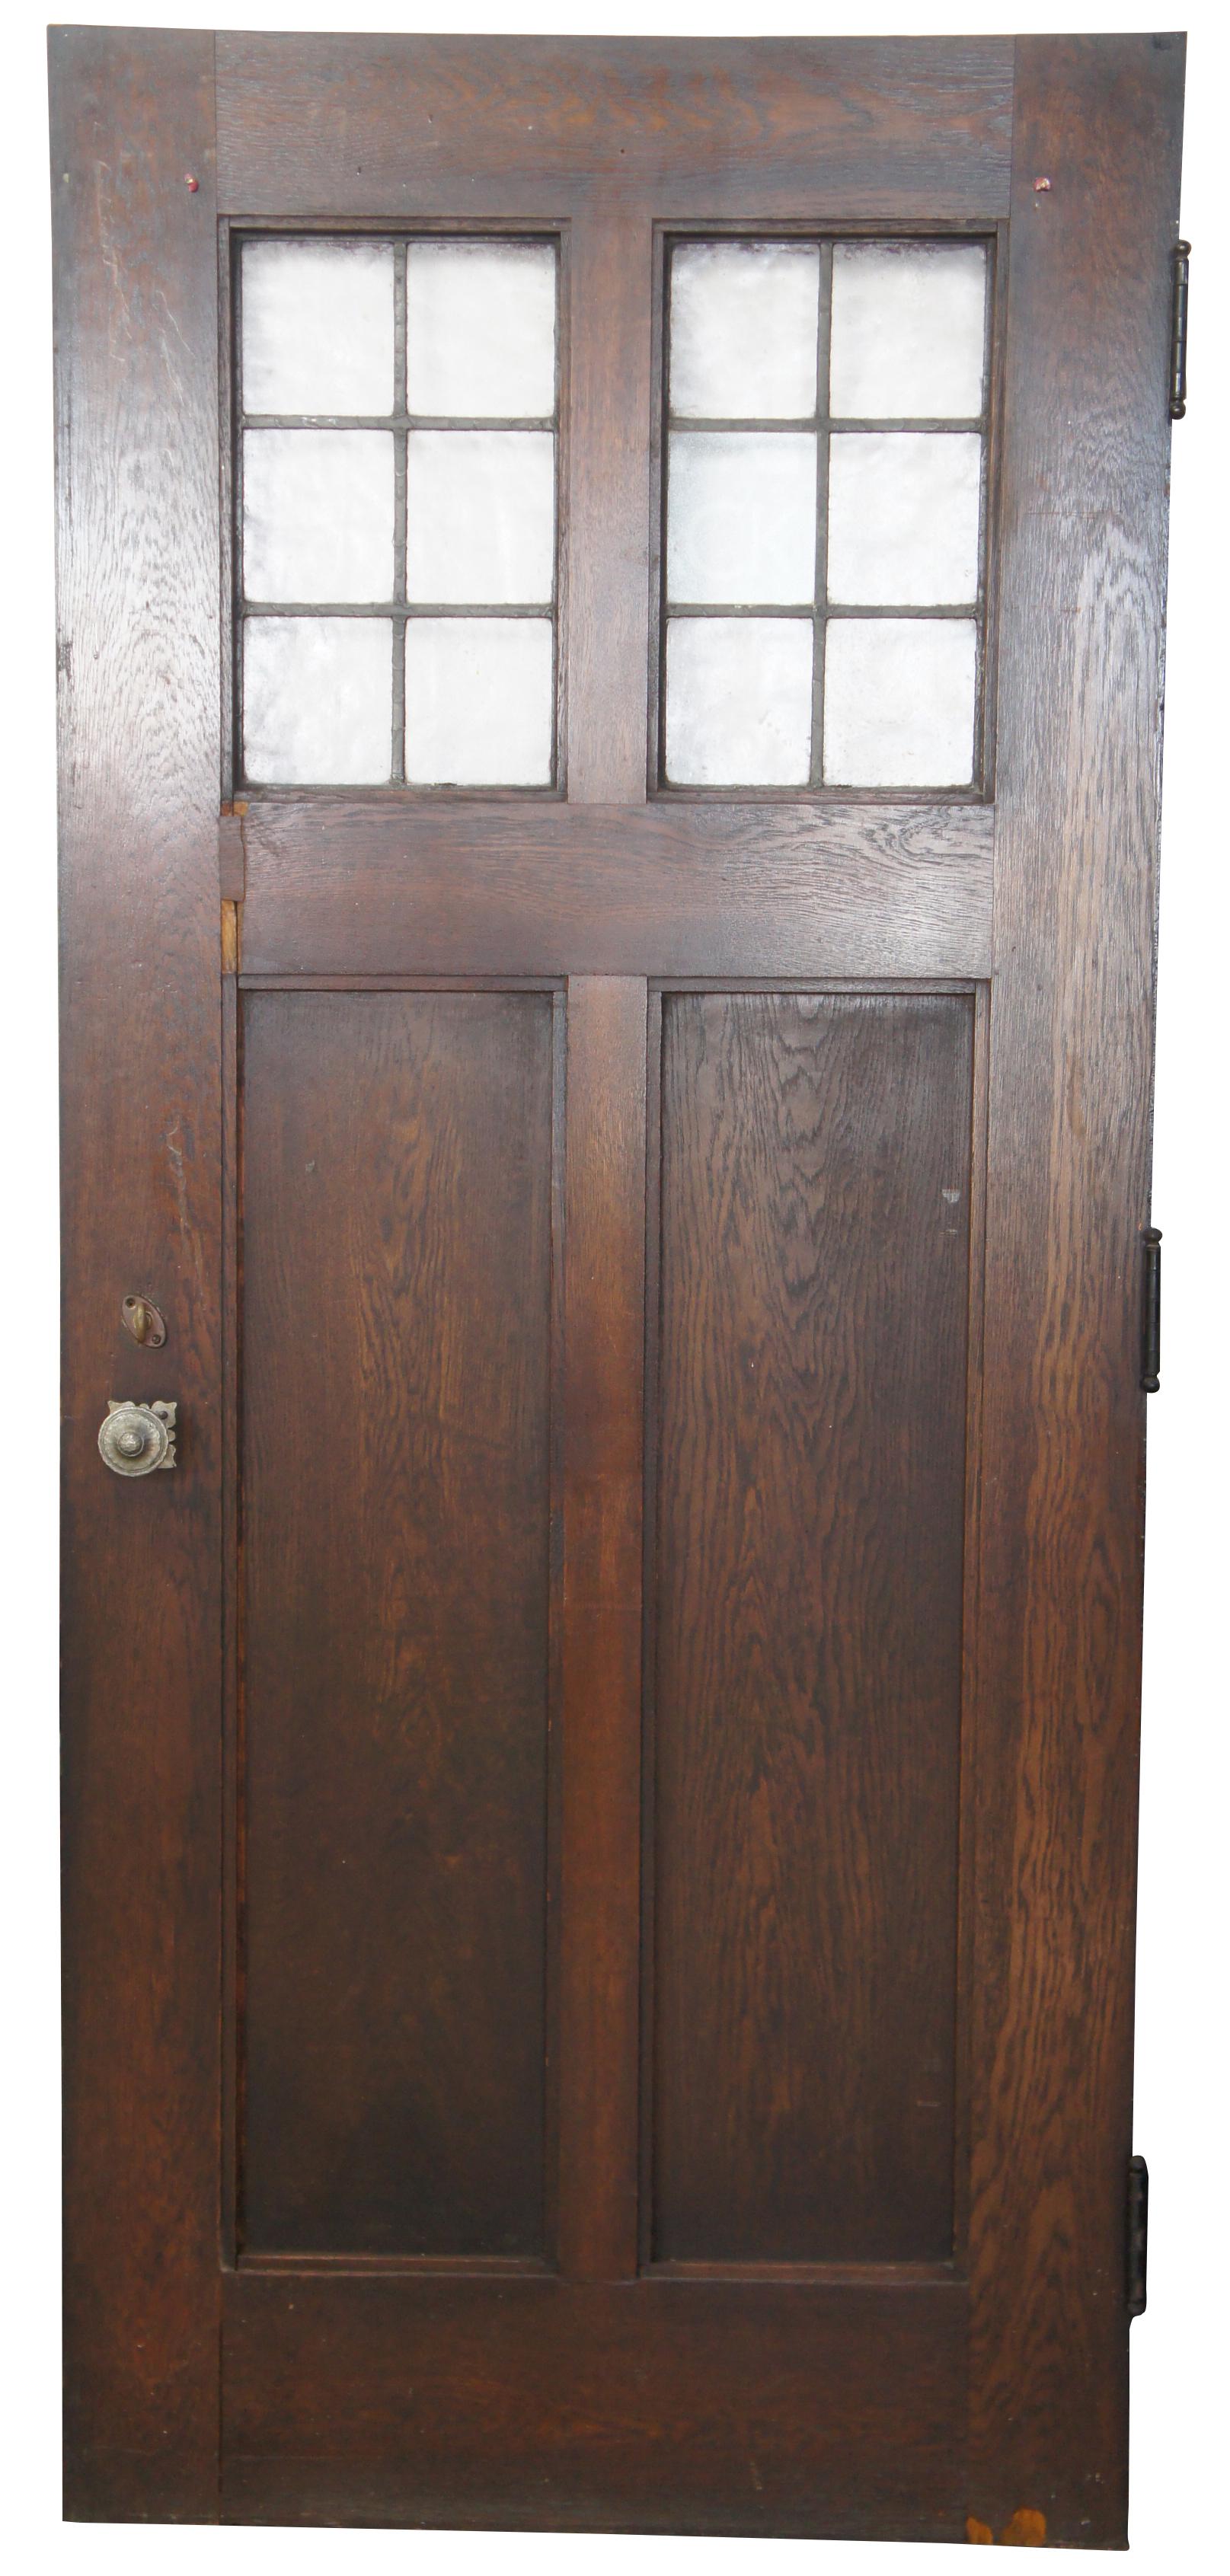 Early 20th century indoor outdoor paneled oak and leaded glass door. Features hammered brass hardware and deadbolt lock. Comes from one of the first homes built in oakwood, Ohio by Harry I Schenck, circa early 1900s. Measures: 36” x 81”.
  